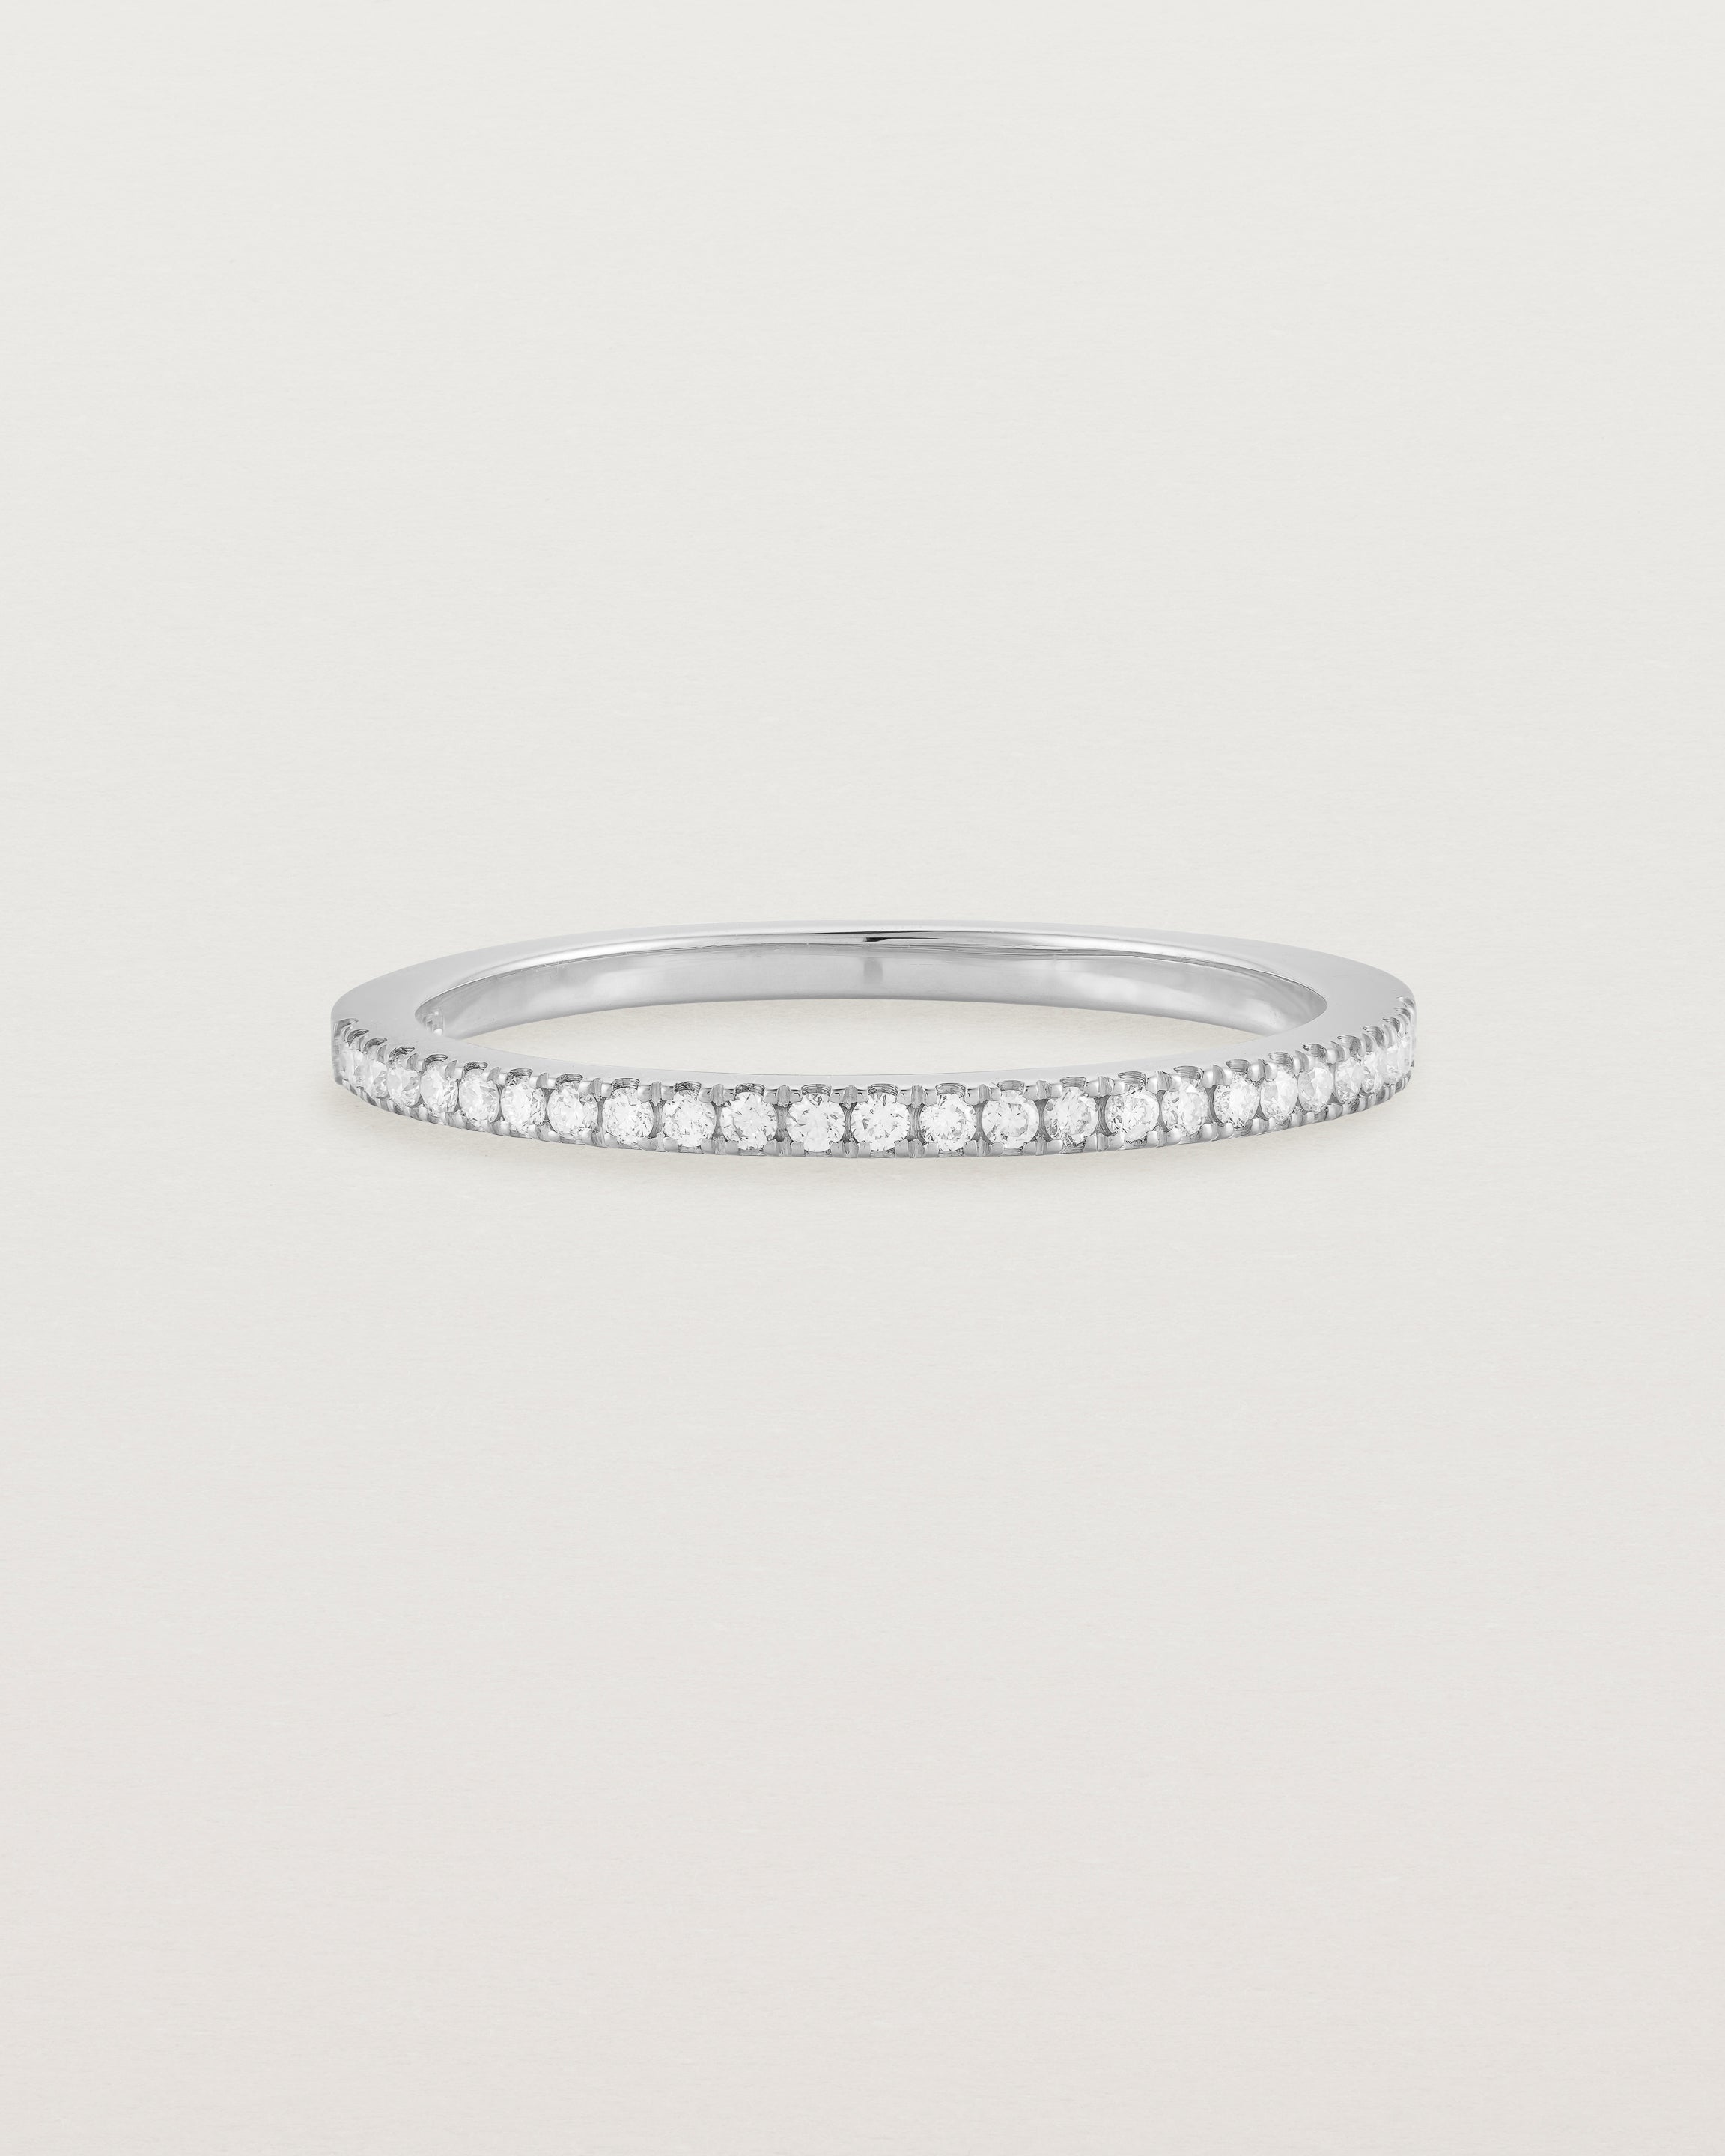 white gold band with half a band of micro pave diamonds